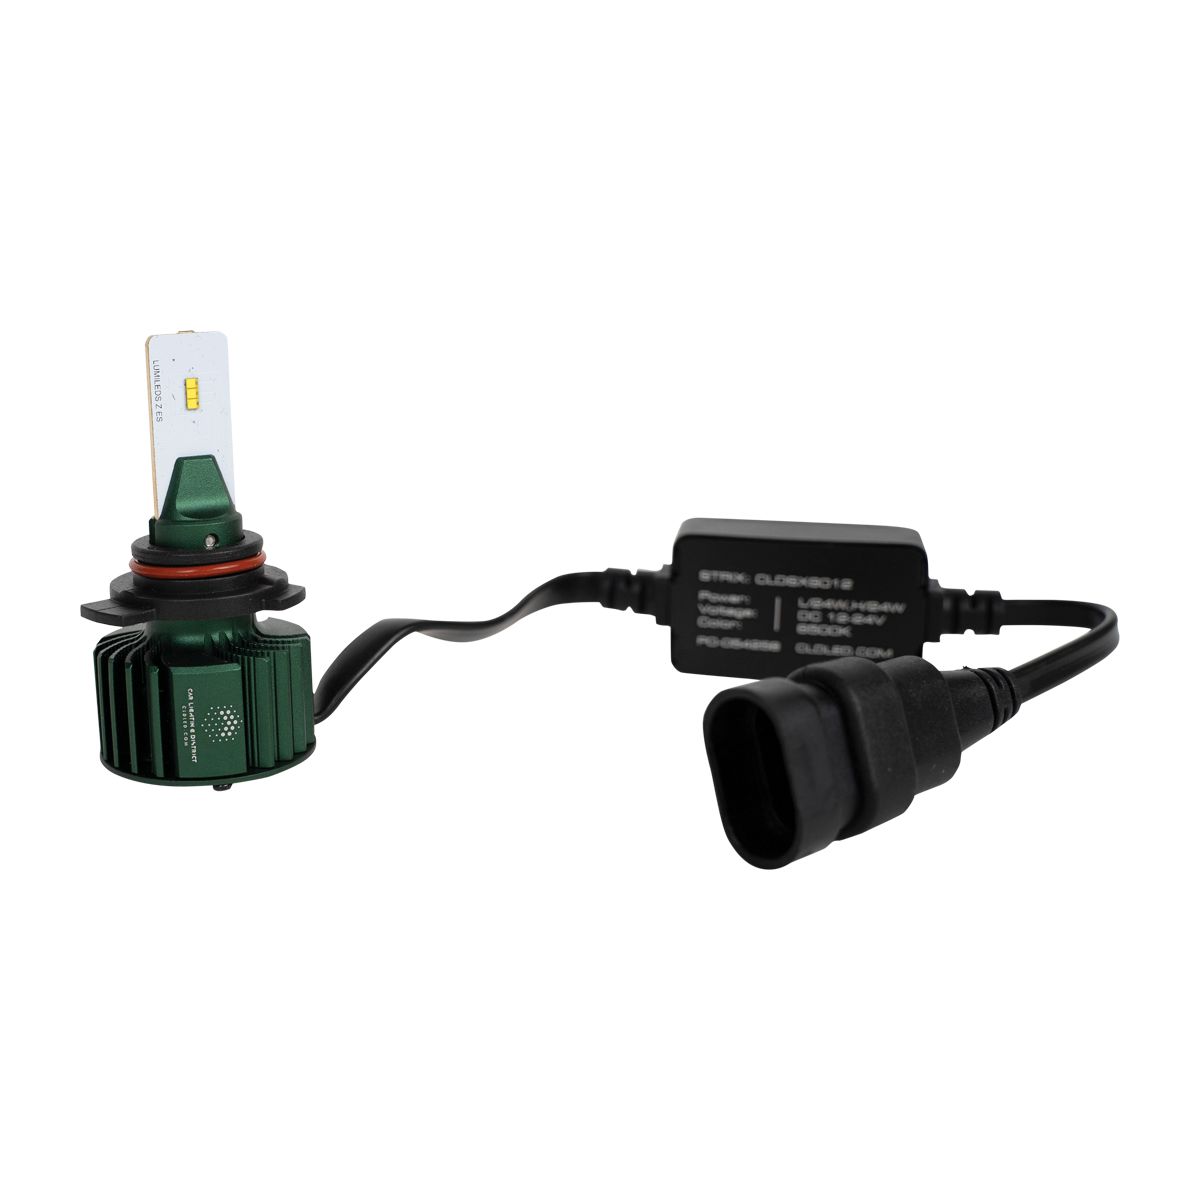 CLD CLDSX9012-1 - Strix 9012 LED Conversion Kit - 4000 Lumens (Sold individually)